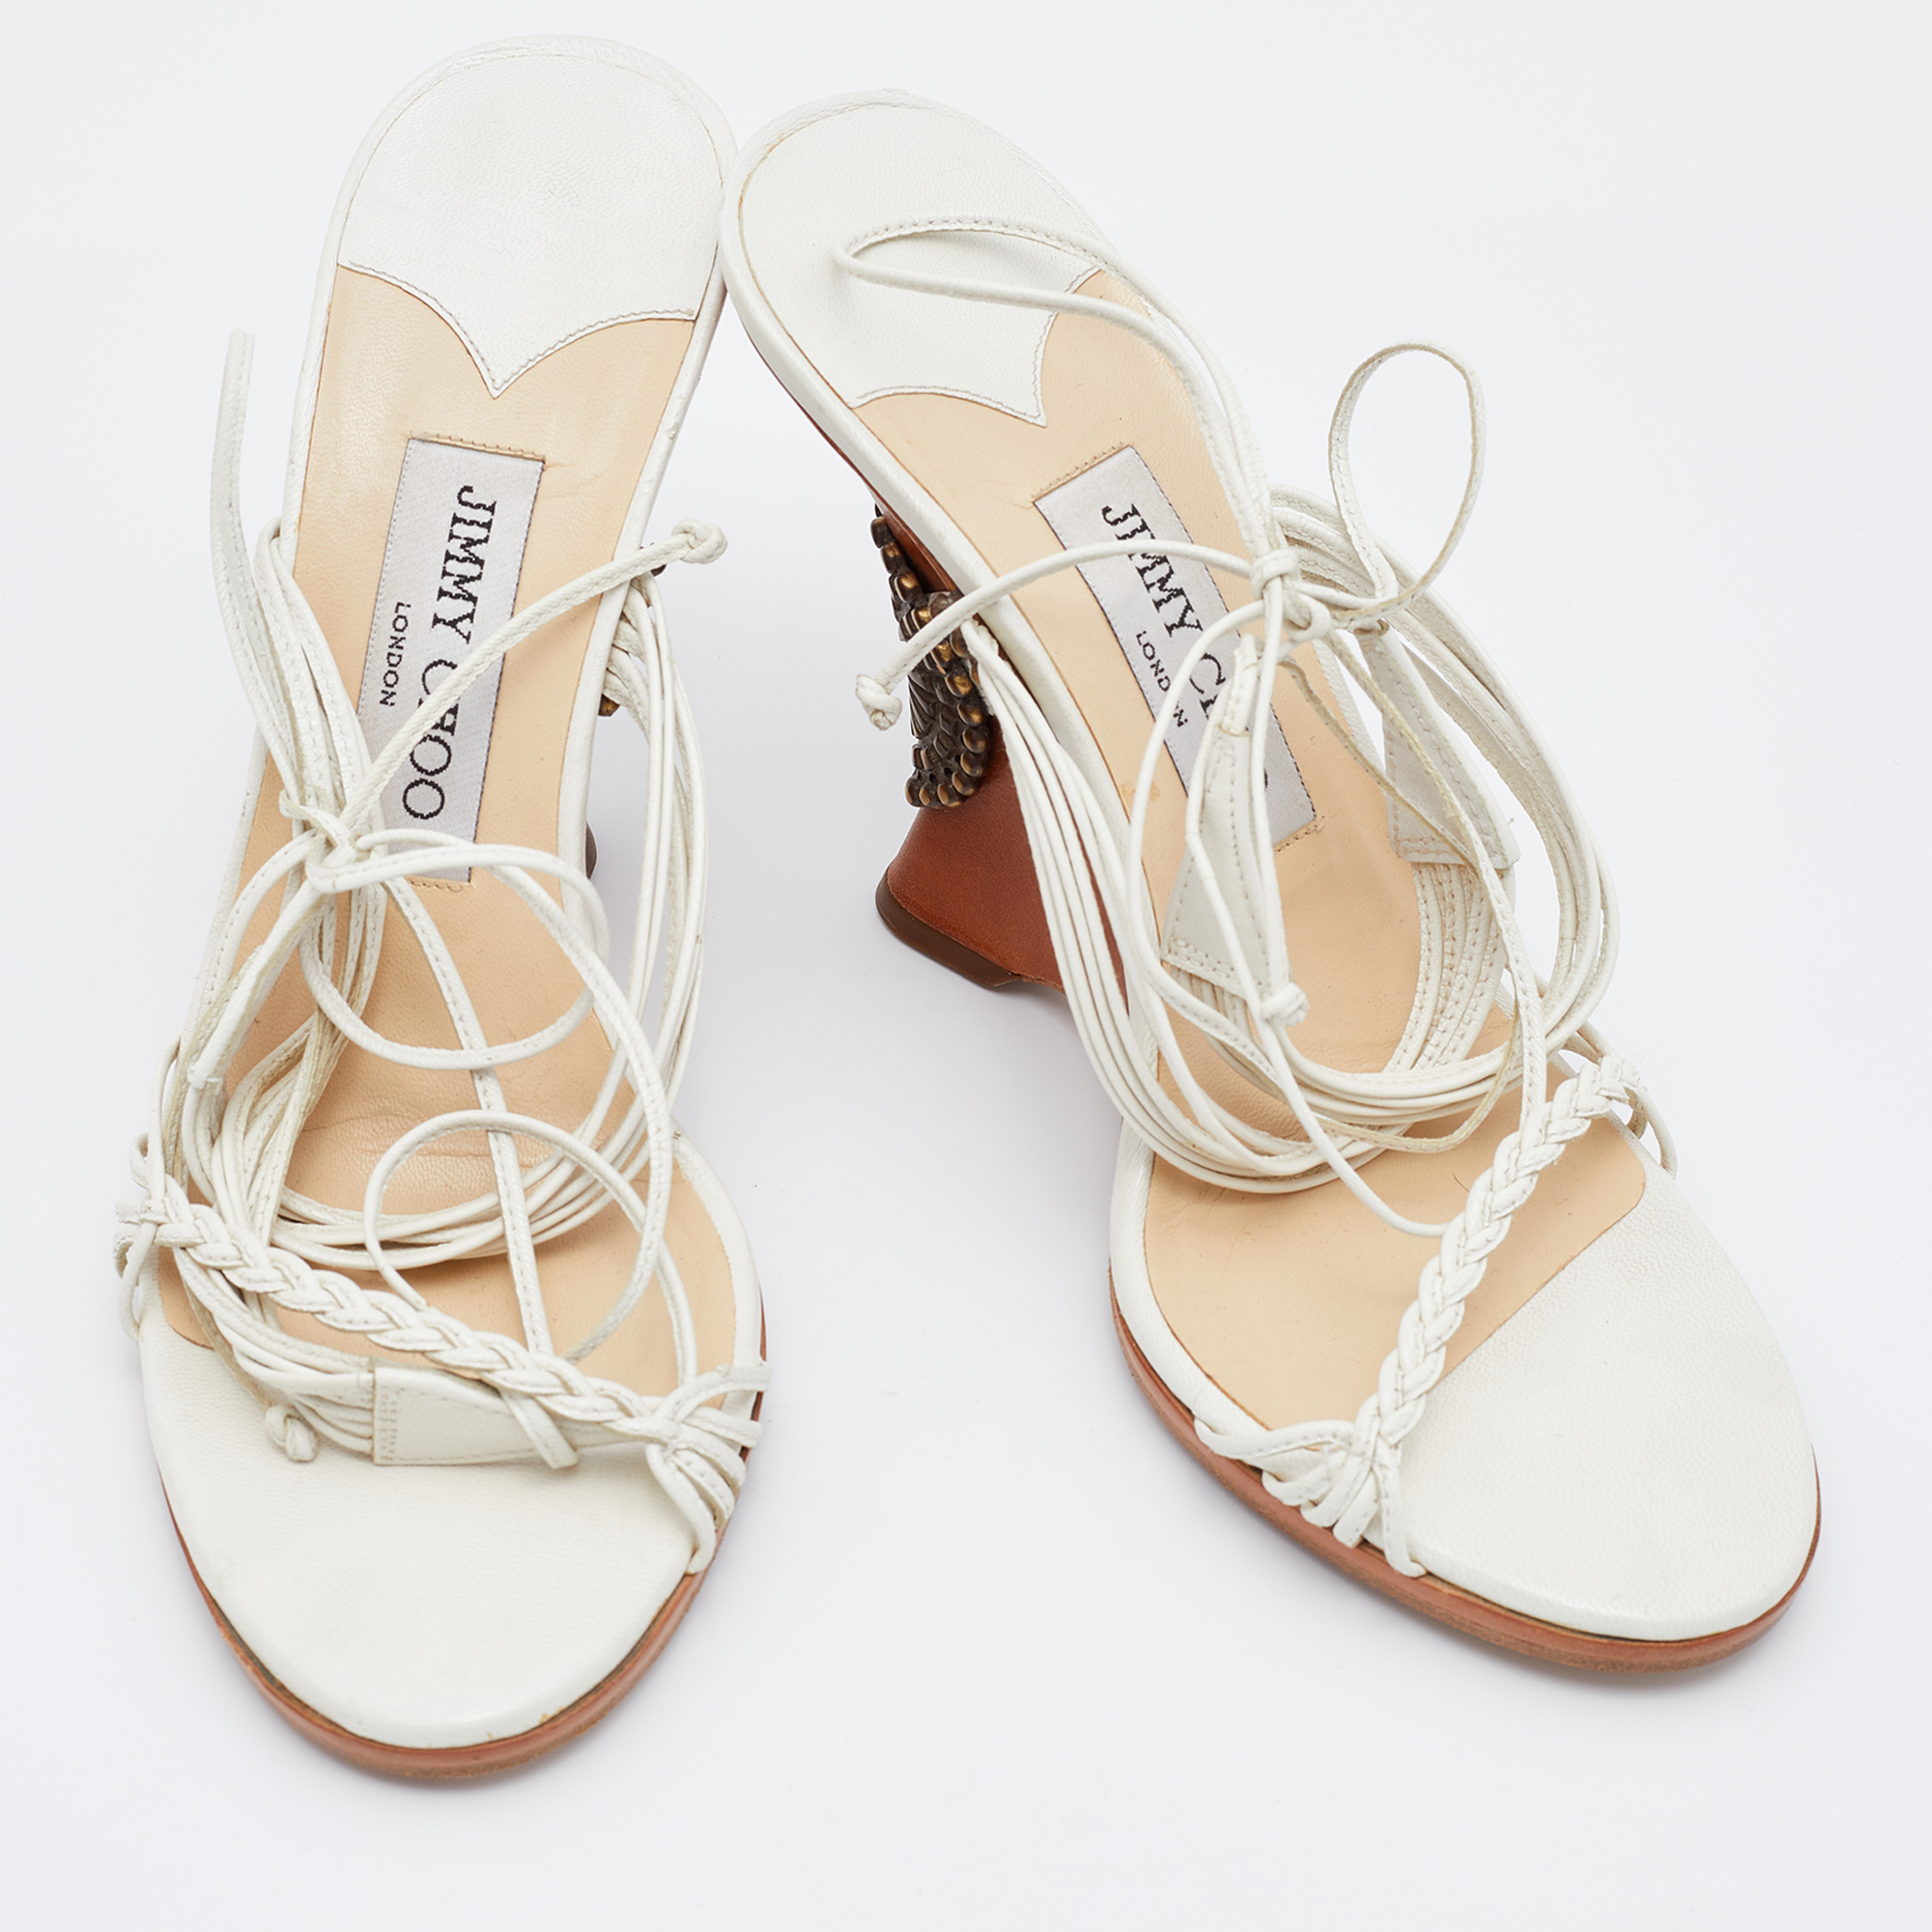 Jimmy Choo White Leather Ankle Wrap Wedge Sandals Size 37.5